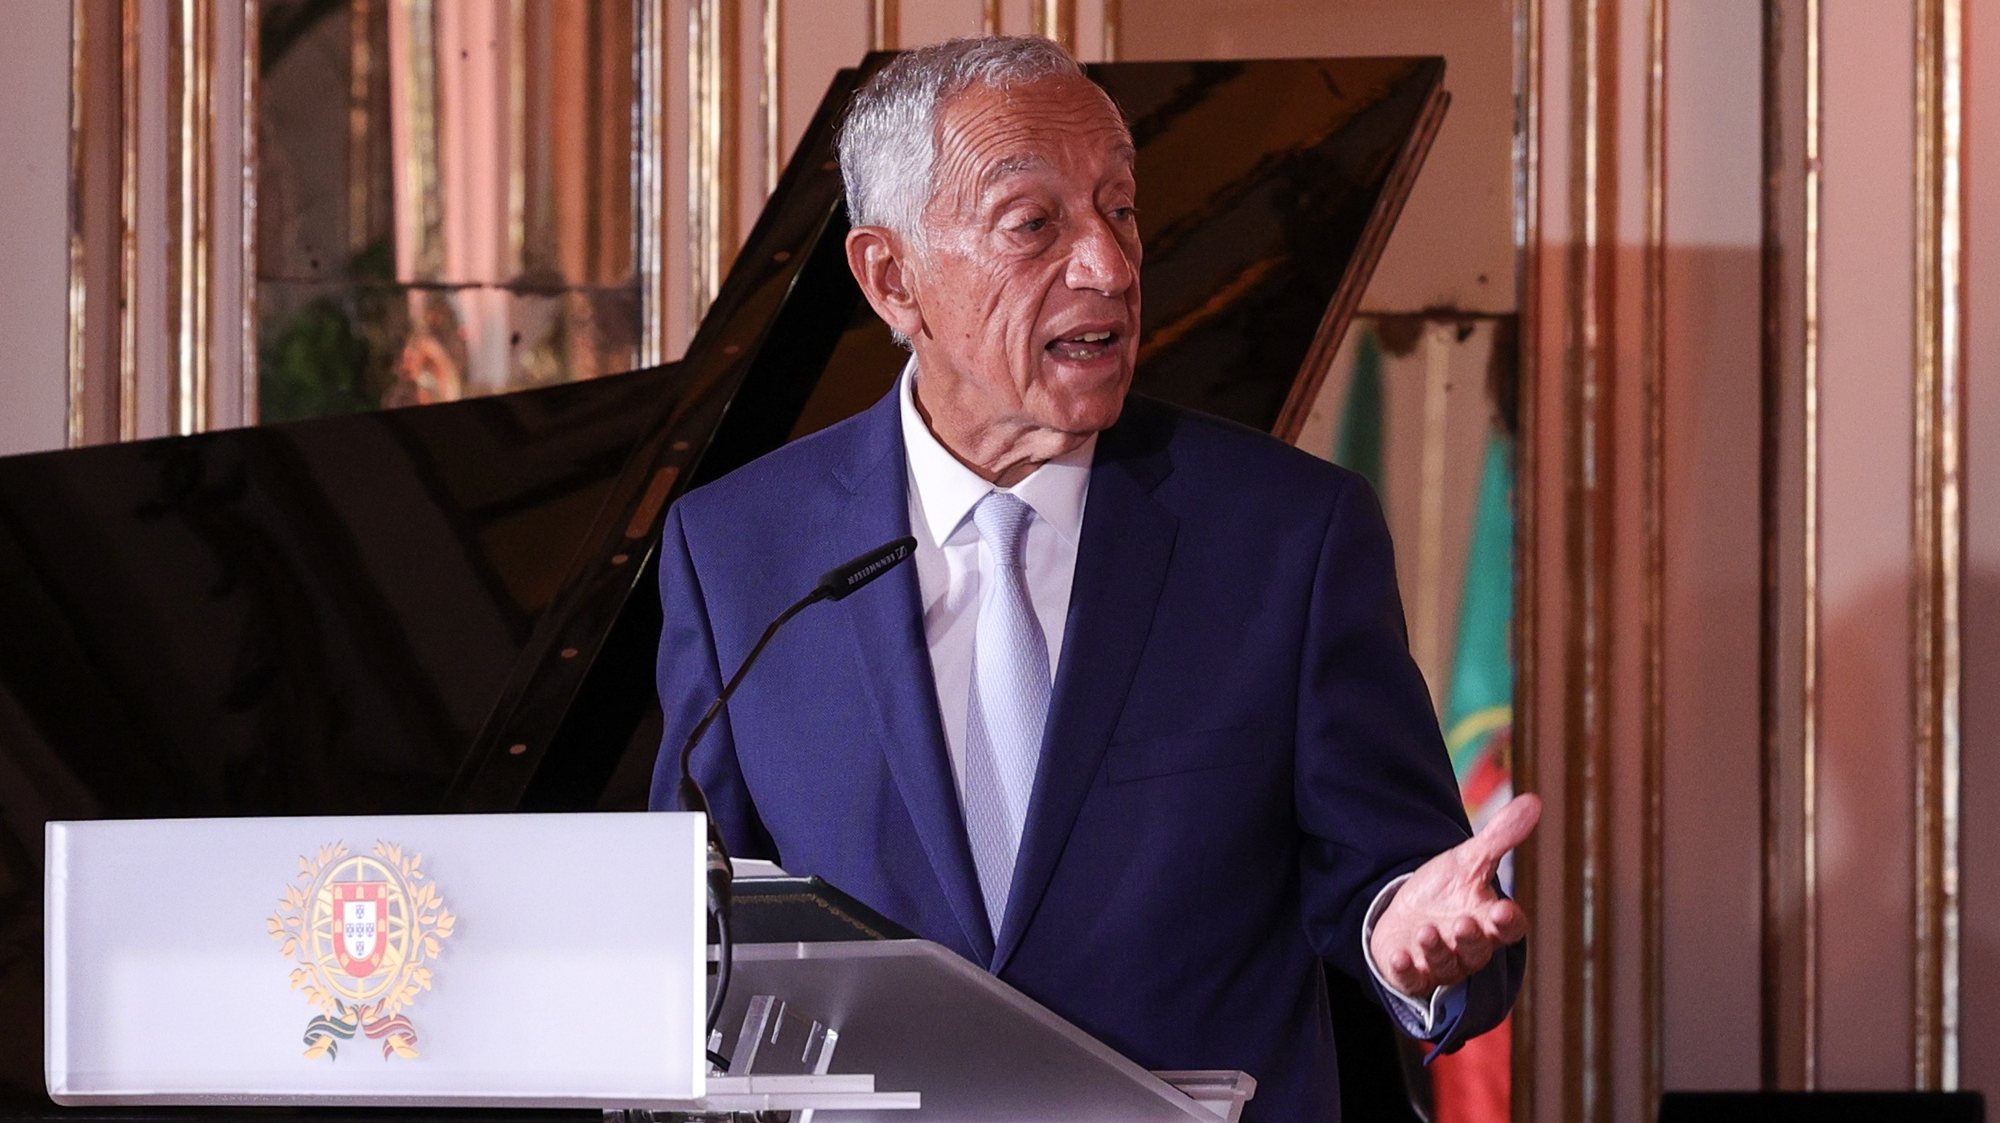 President of Portugal Marcelo Rebelo de Sousa, speaks during the Camoes Award ceremony at National Palace of Queluz, Portugal, 24 April 2023.  ANTONIO COTRIM/LUSA